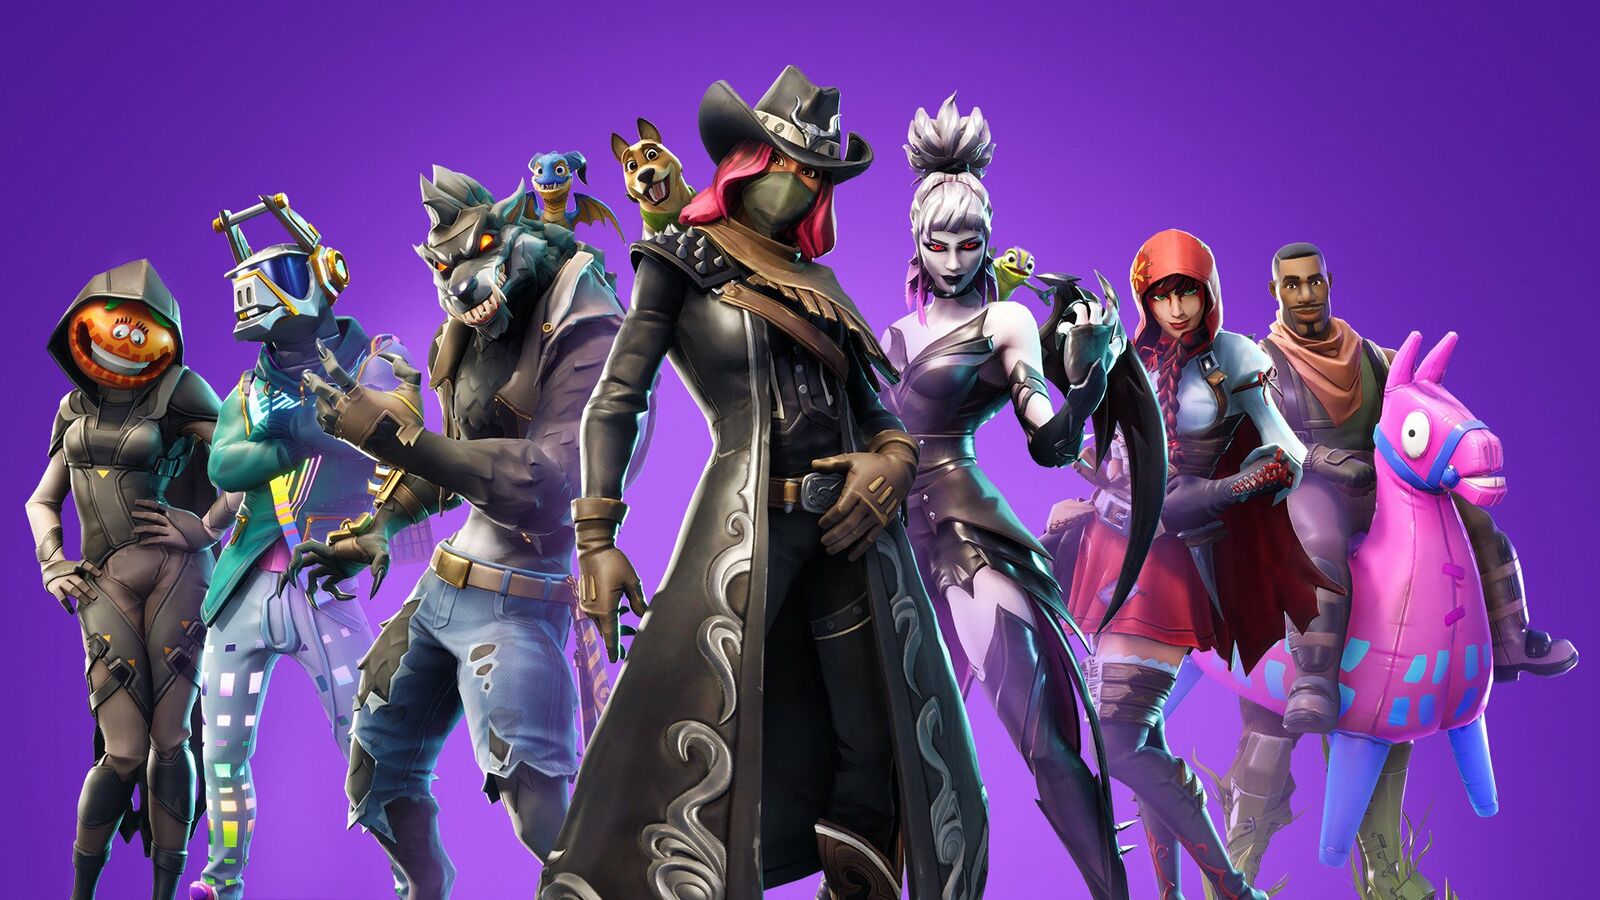 Fortnite Season 6 Skins Are Full On Spooky Halloween Outfits